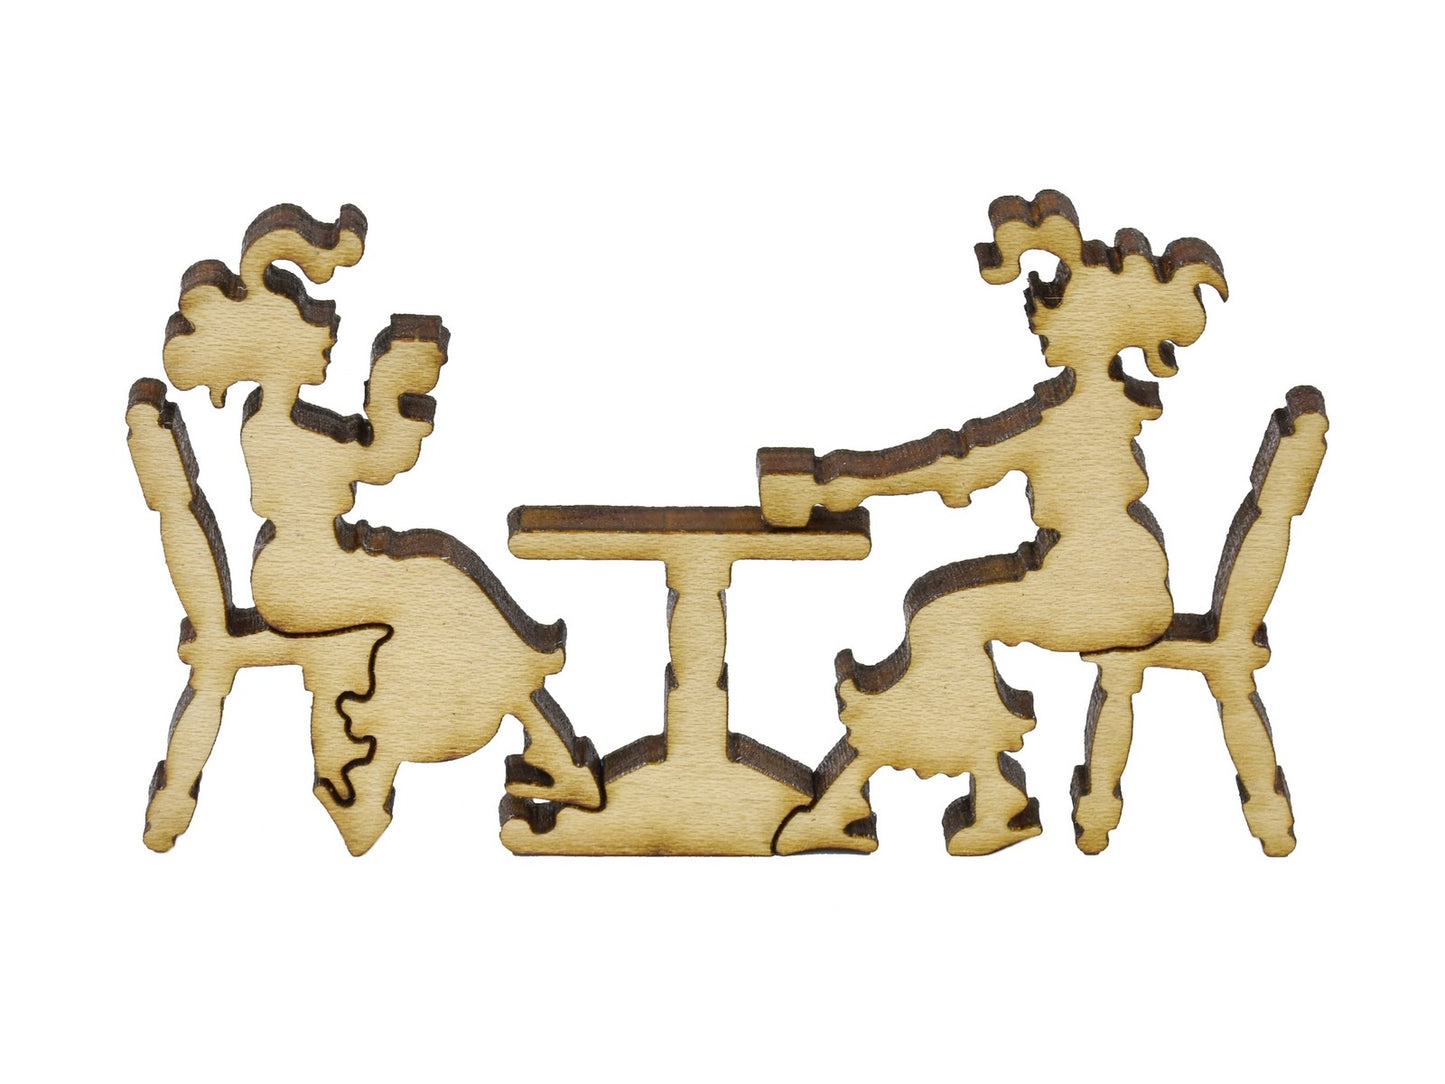 A closeup of pieces in the shape of two people sitting at a table.